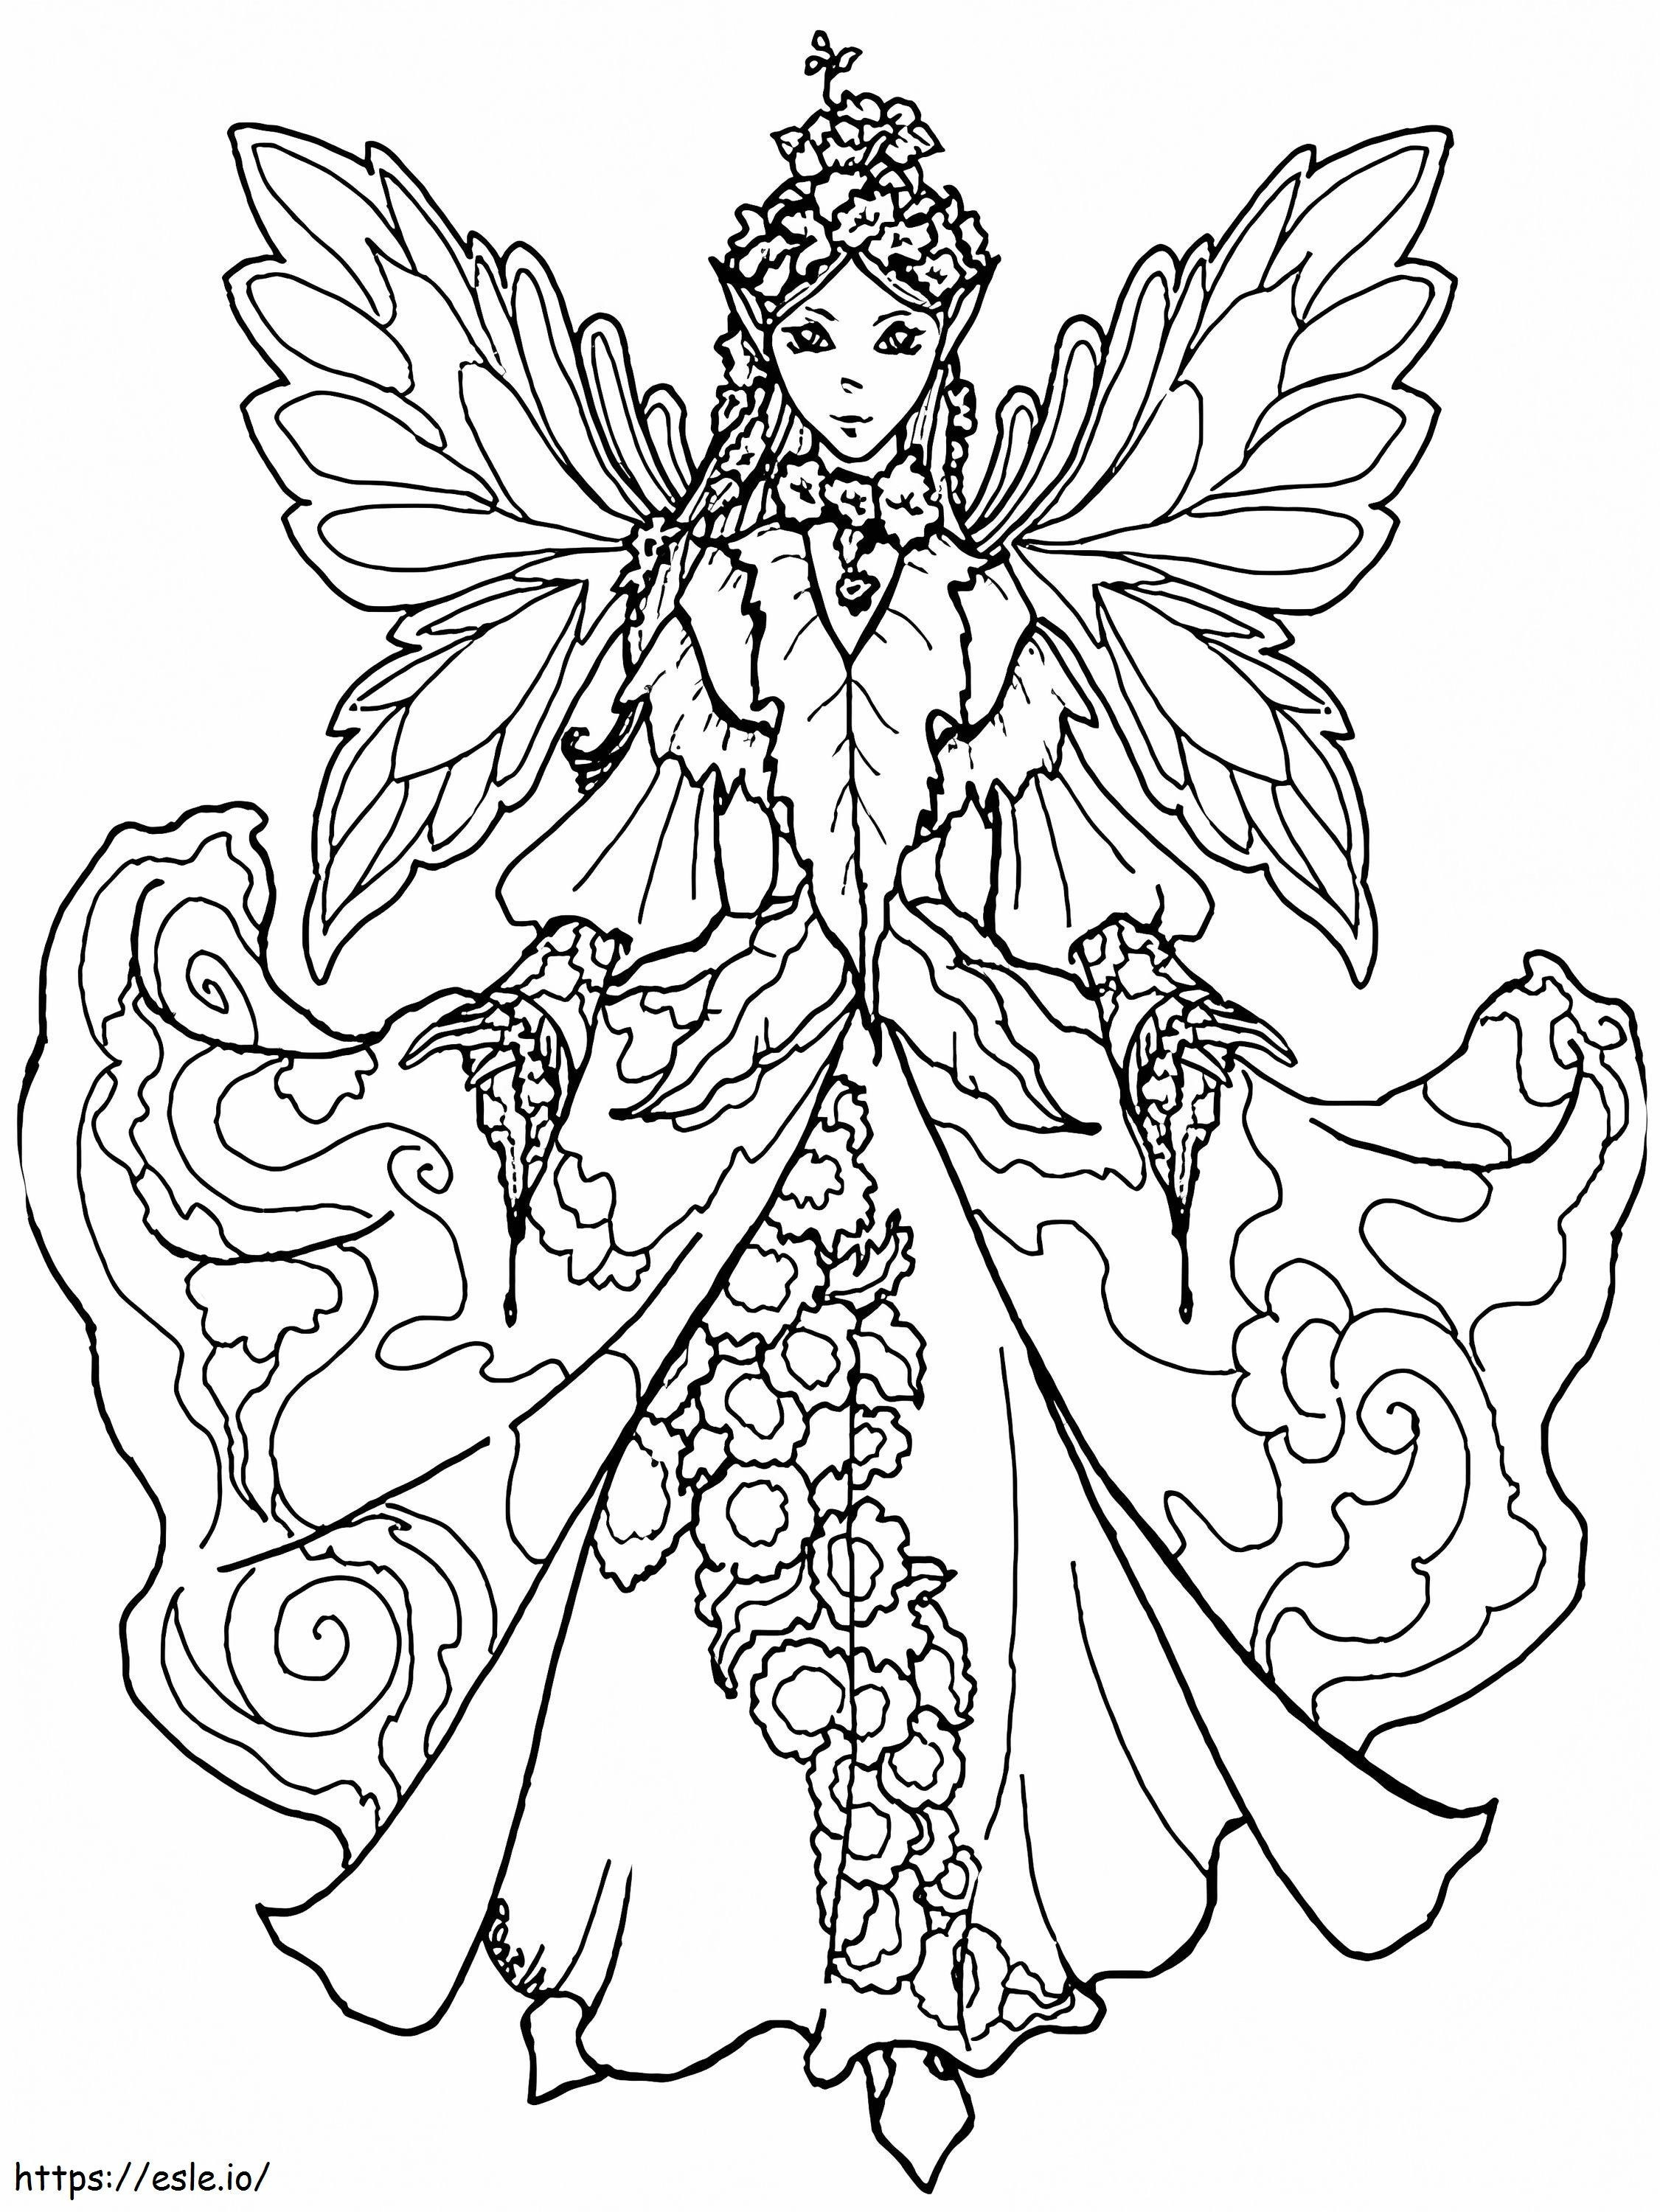 1584067313 Fairy Coloring For Adults Fairies And Unicorns With Impressive Dress Rainbow Magic Unicorn Mermaids Riding Leona coloring page